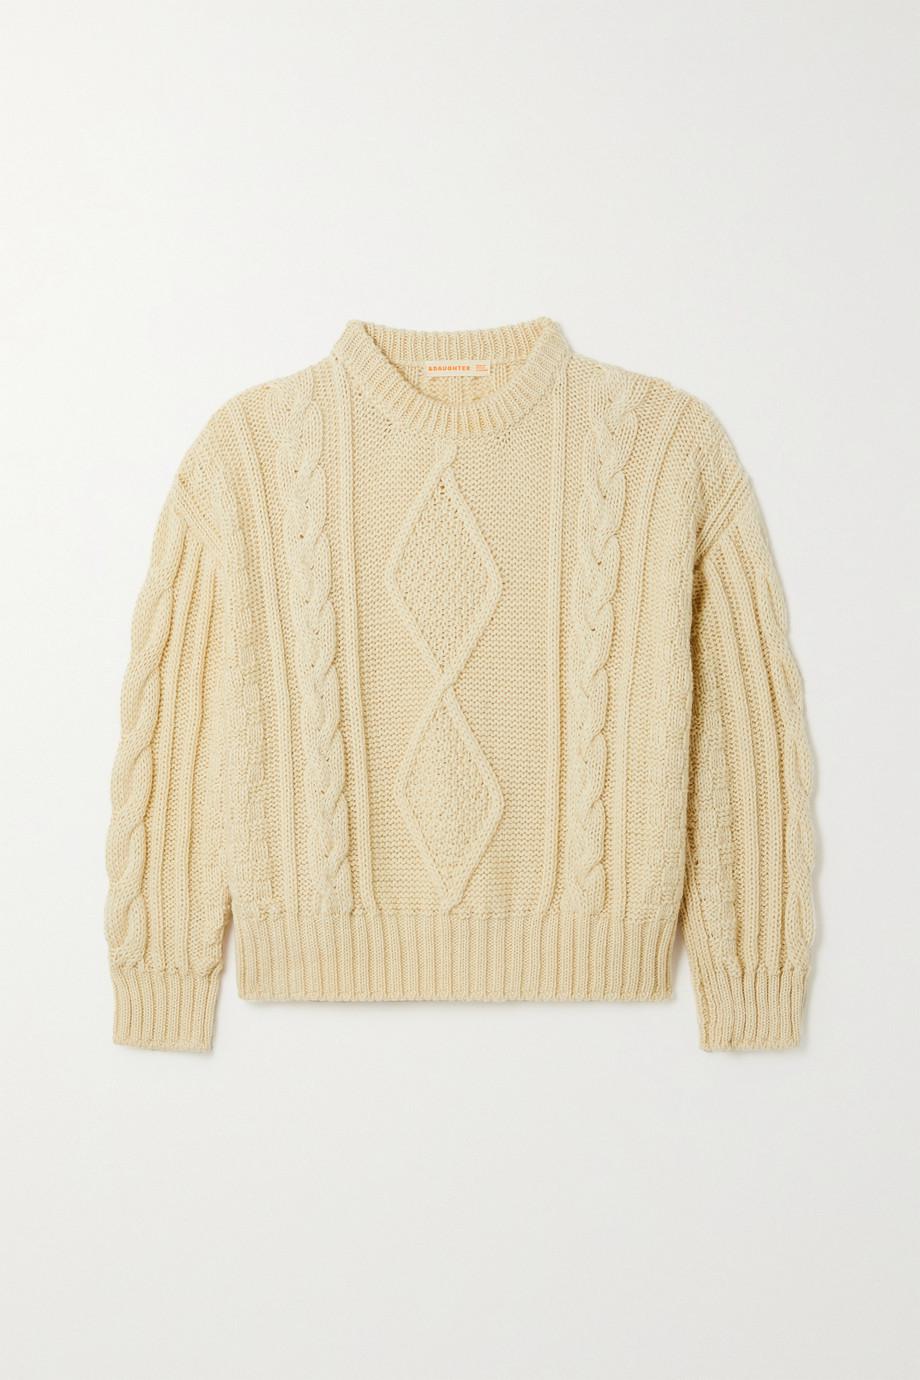 + NET SUSTAIN Aoife cable-knit wool sweater by &DAUGHTER